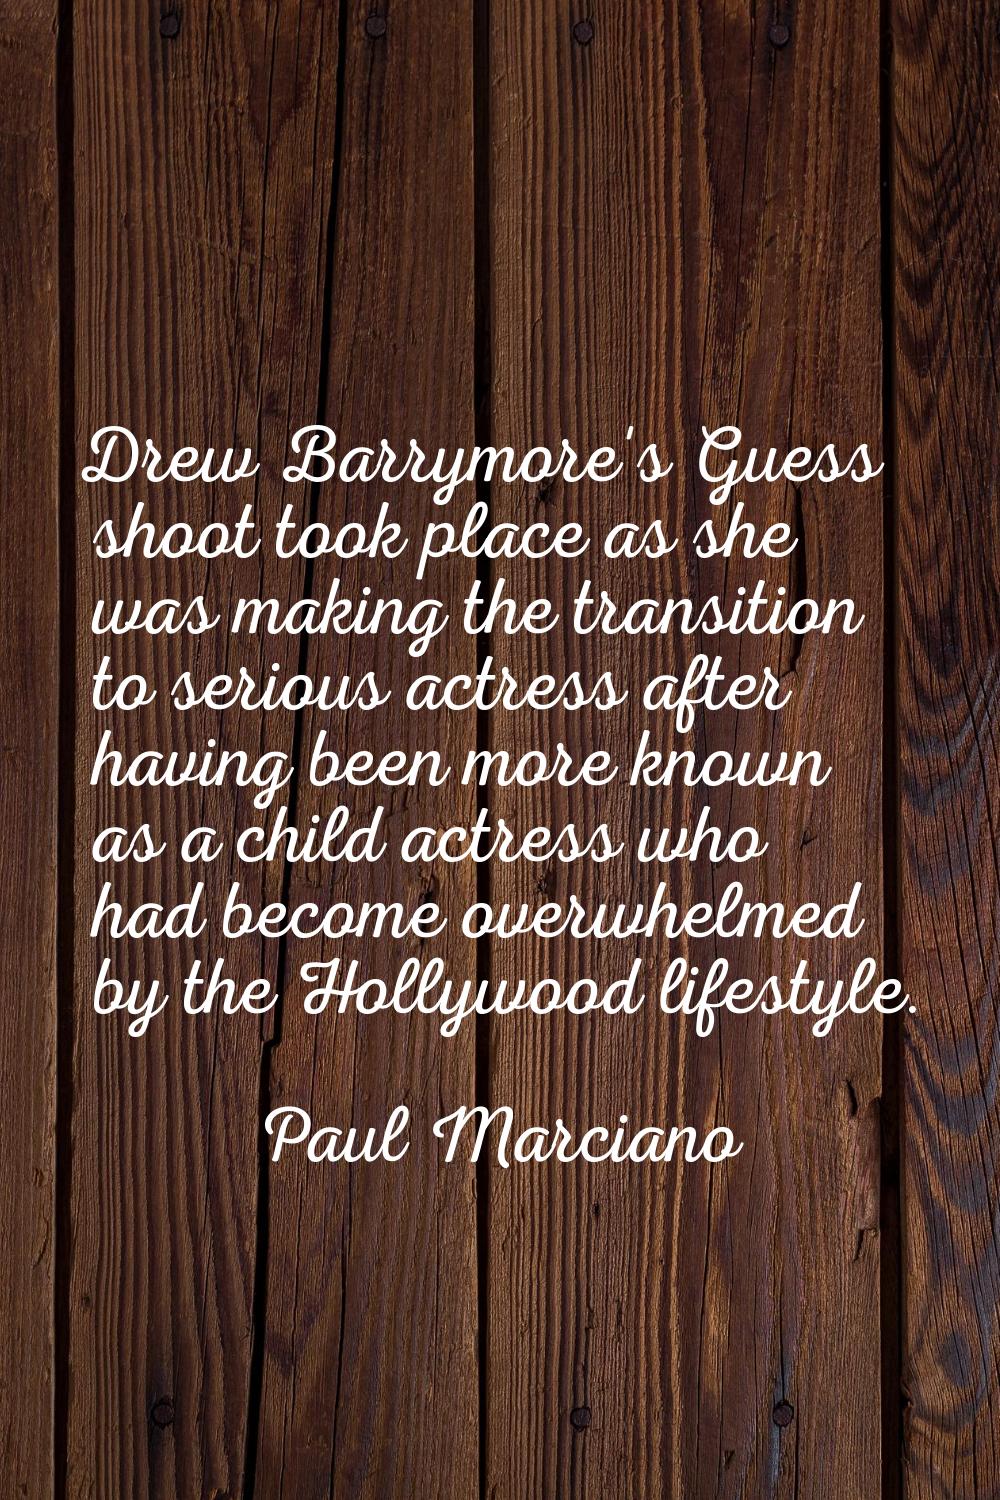 Drew Barrymore's Guess shoot took place as she was making the transition to serious actress after h